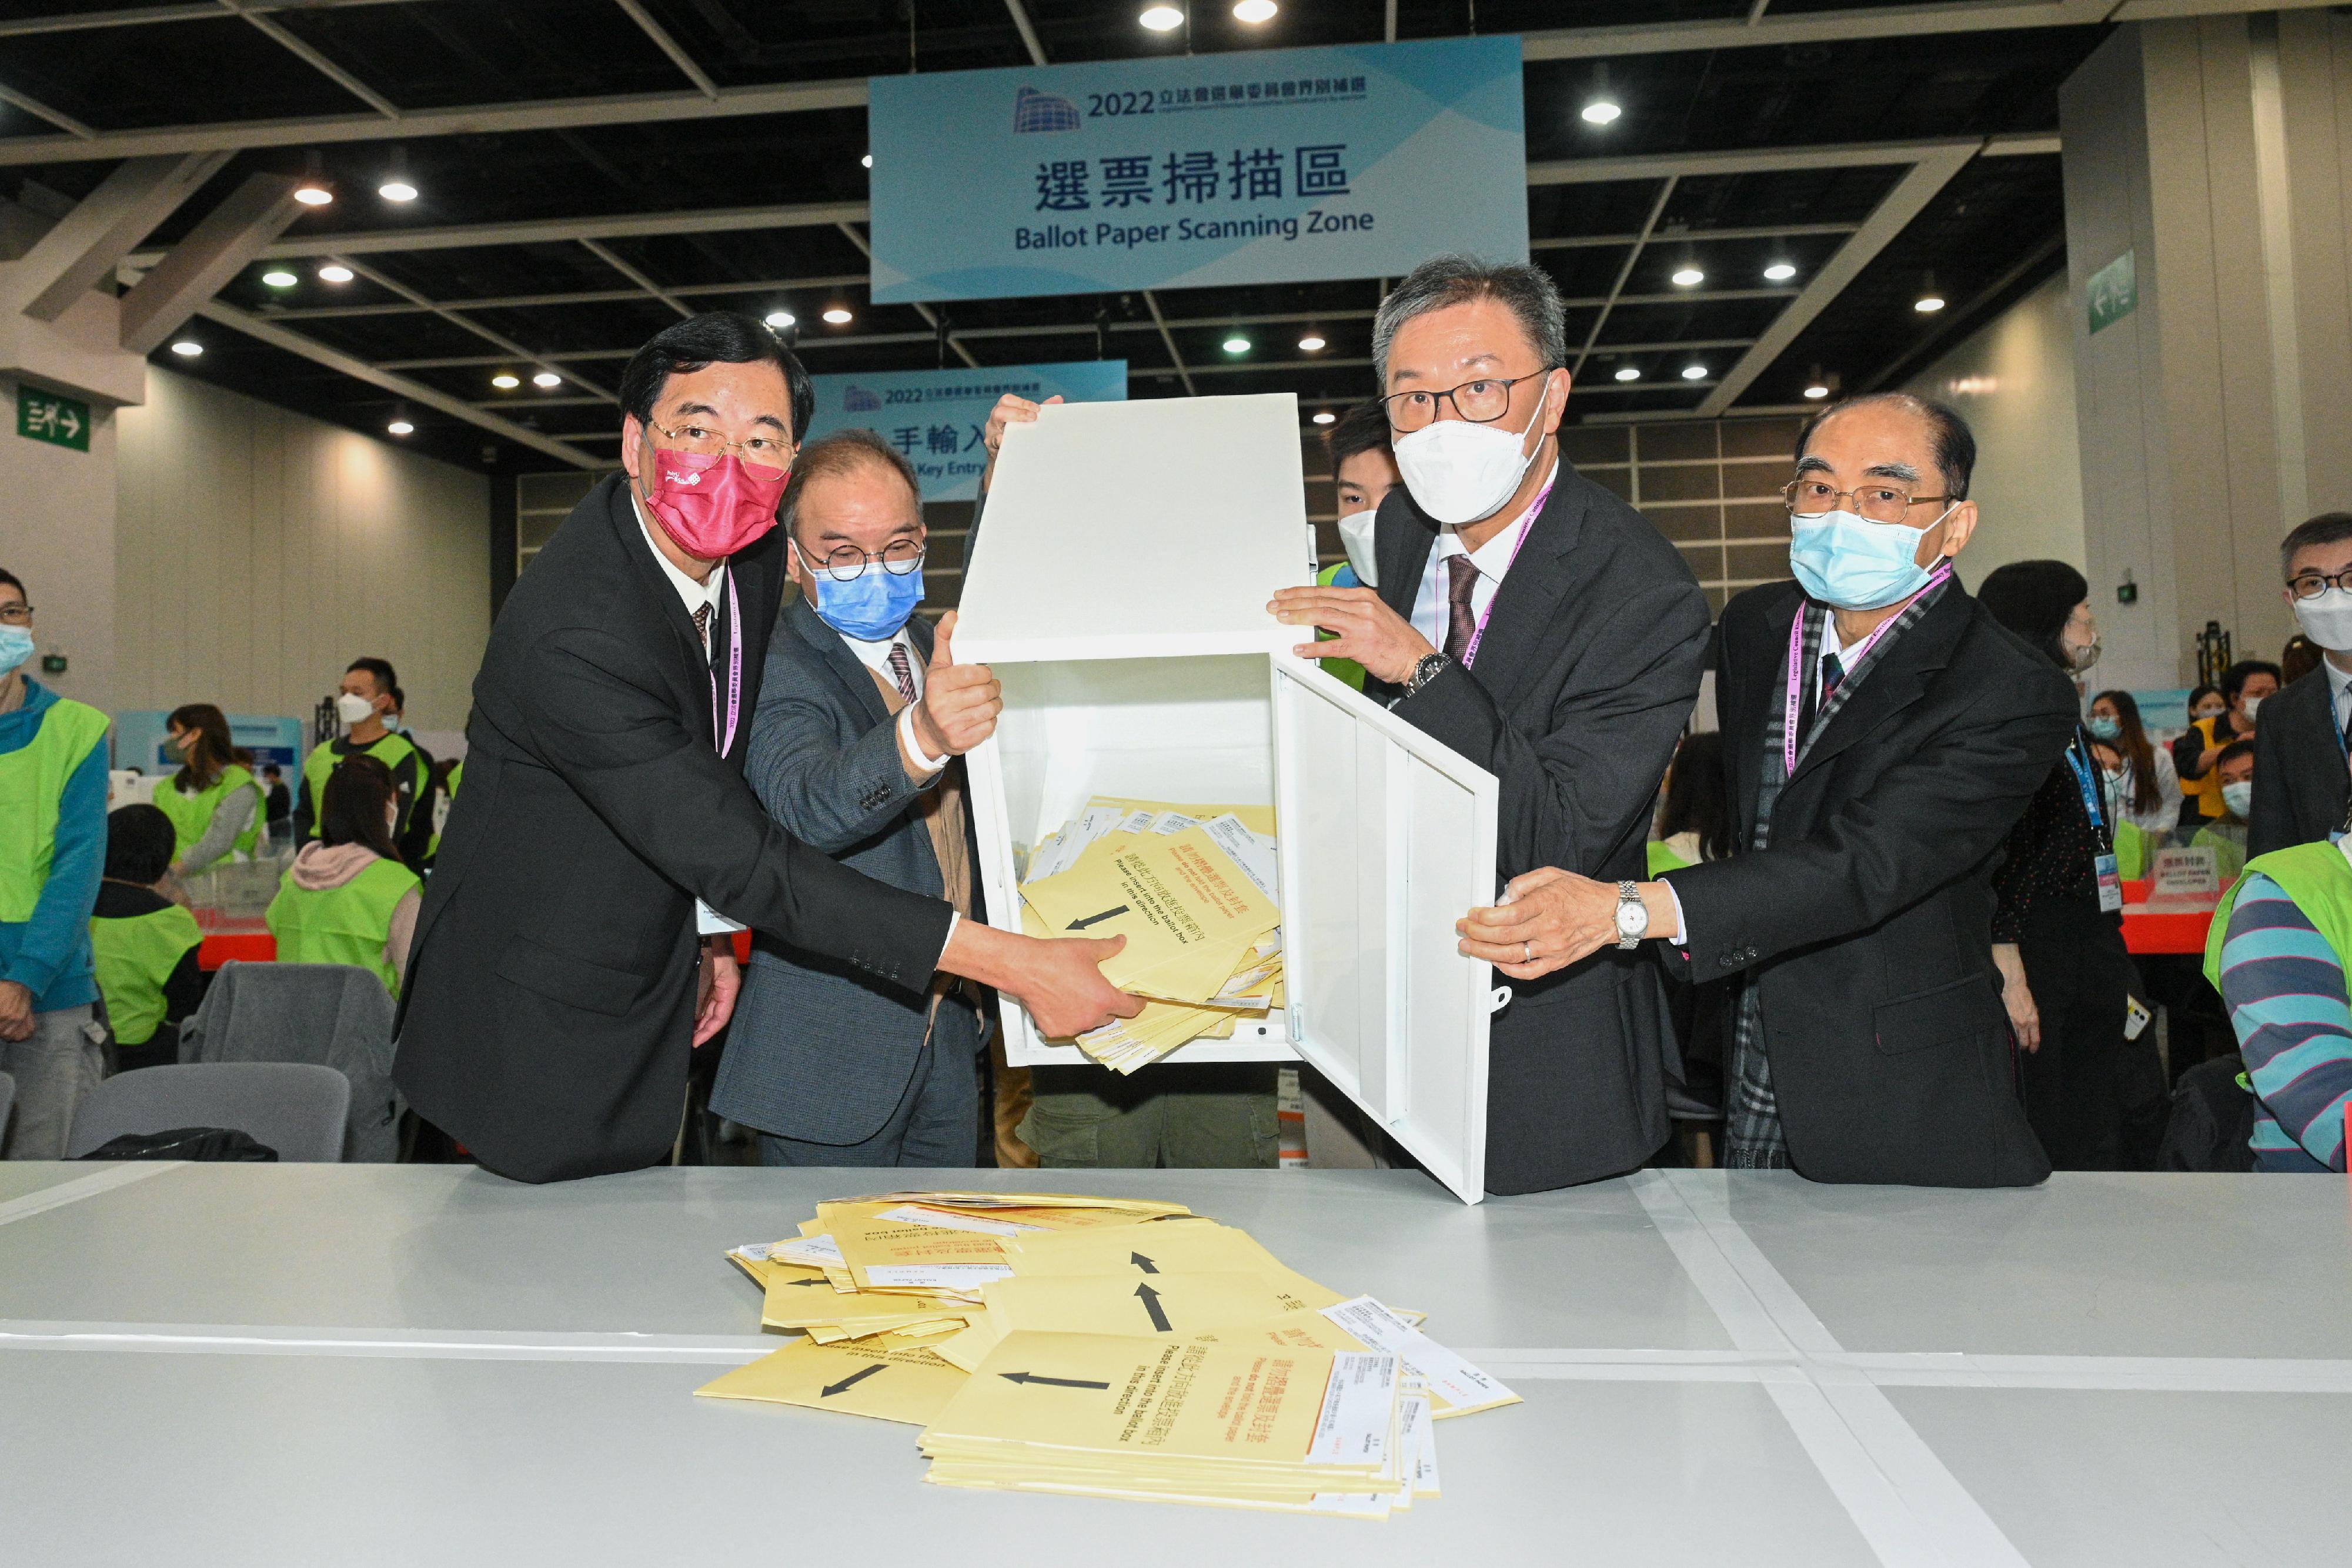 The Chairman of the Electoral Affairs Commission (EAC), Mr Justice David Lok (second right), the Secretary for Constitutional and Mainland Affairs, Mr Erick Tsang Kwok-wai (second left), together with EAC members Mr Arthur Luk, SC (first right), and Professor Daniel Shek (first left), visited the central counting station of the 2022 Legislative Council Election Committee constituency by-election at the Hong Kong Convention and Exhibition Centre today (December 16). Photo shows them in a simulation of emptying a ballot box.